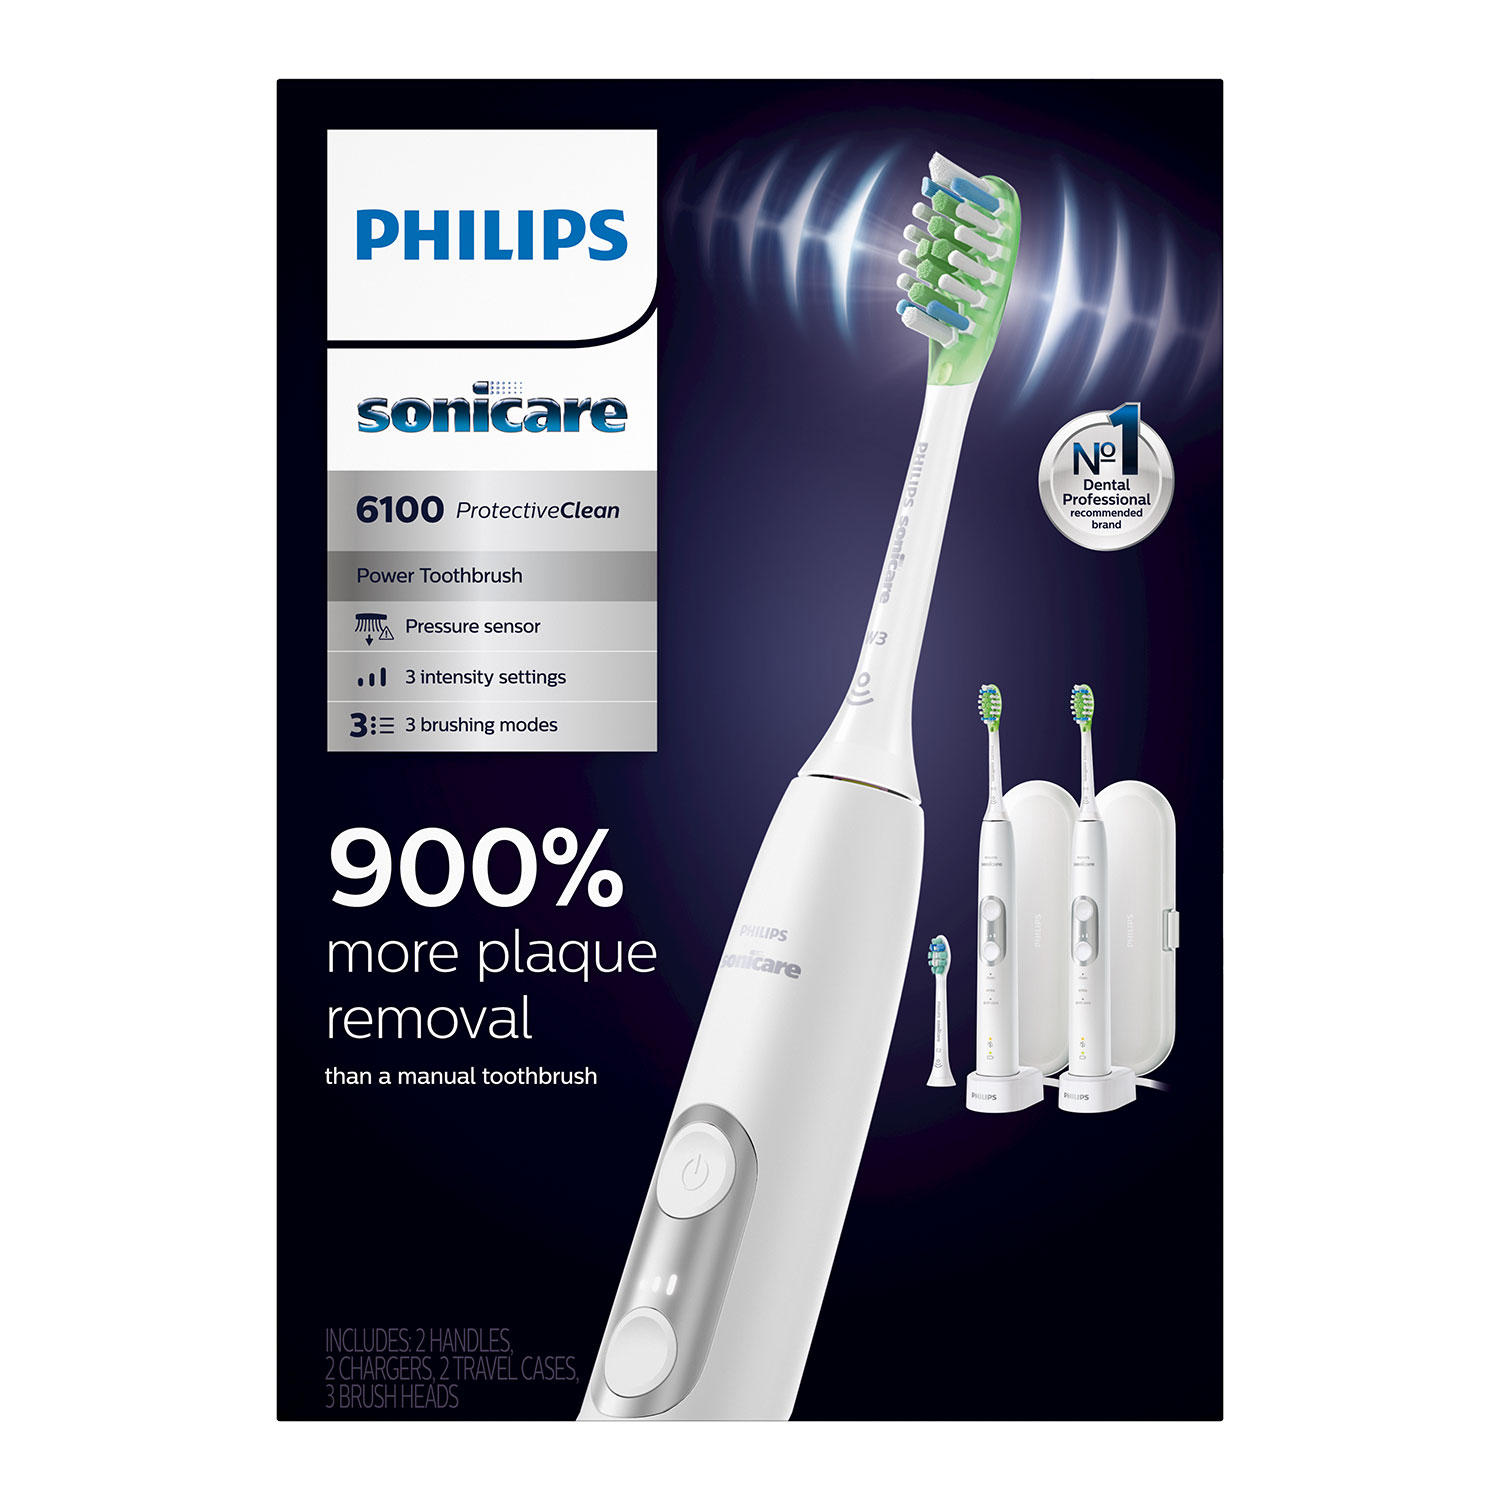 Philips Sonicare ProtectiveClean 6100 Whitening Electric Rechargeable Toothbrush, White (2 Pack)